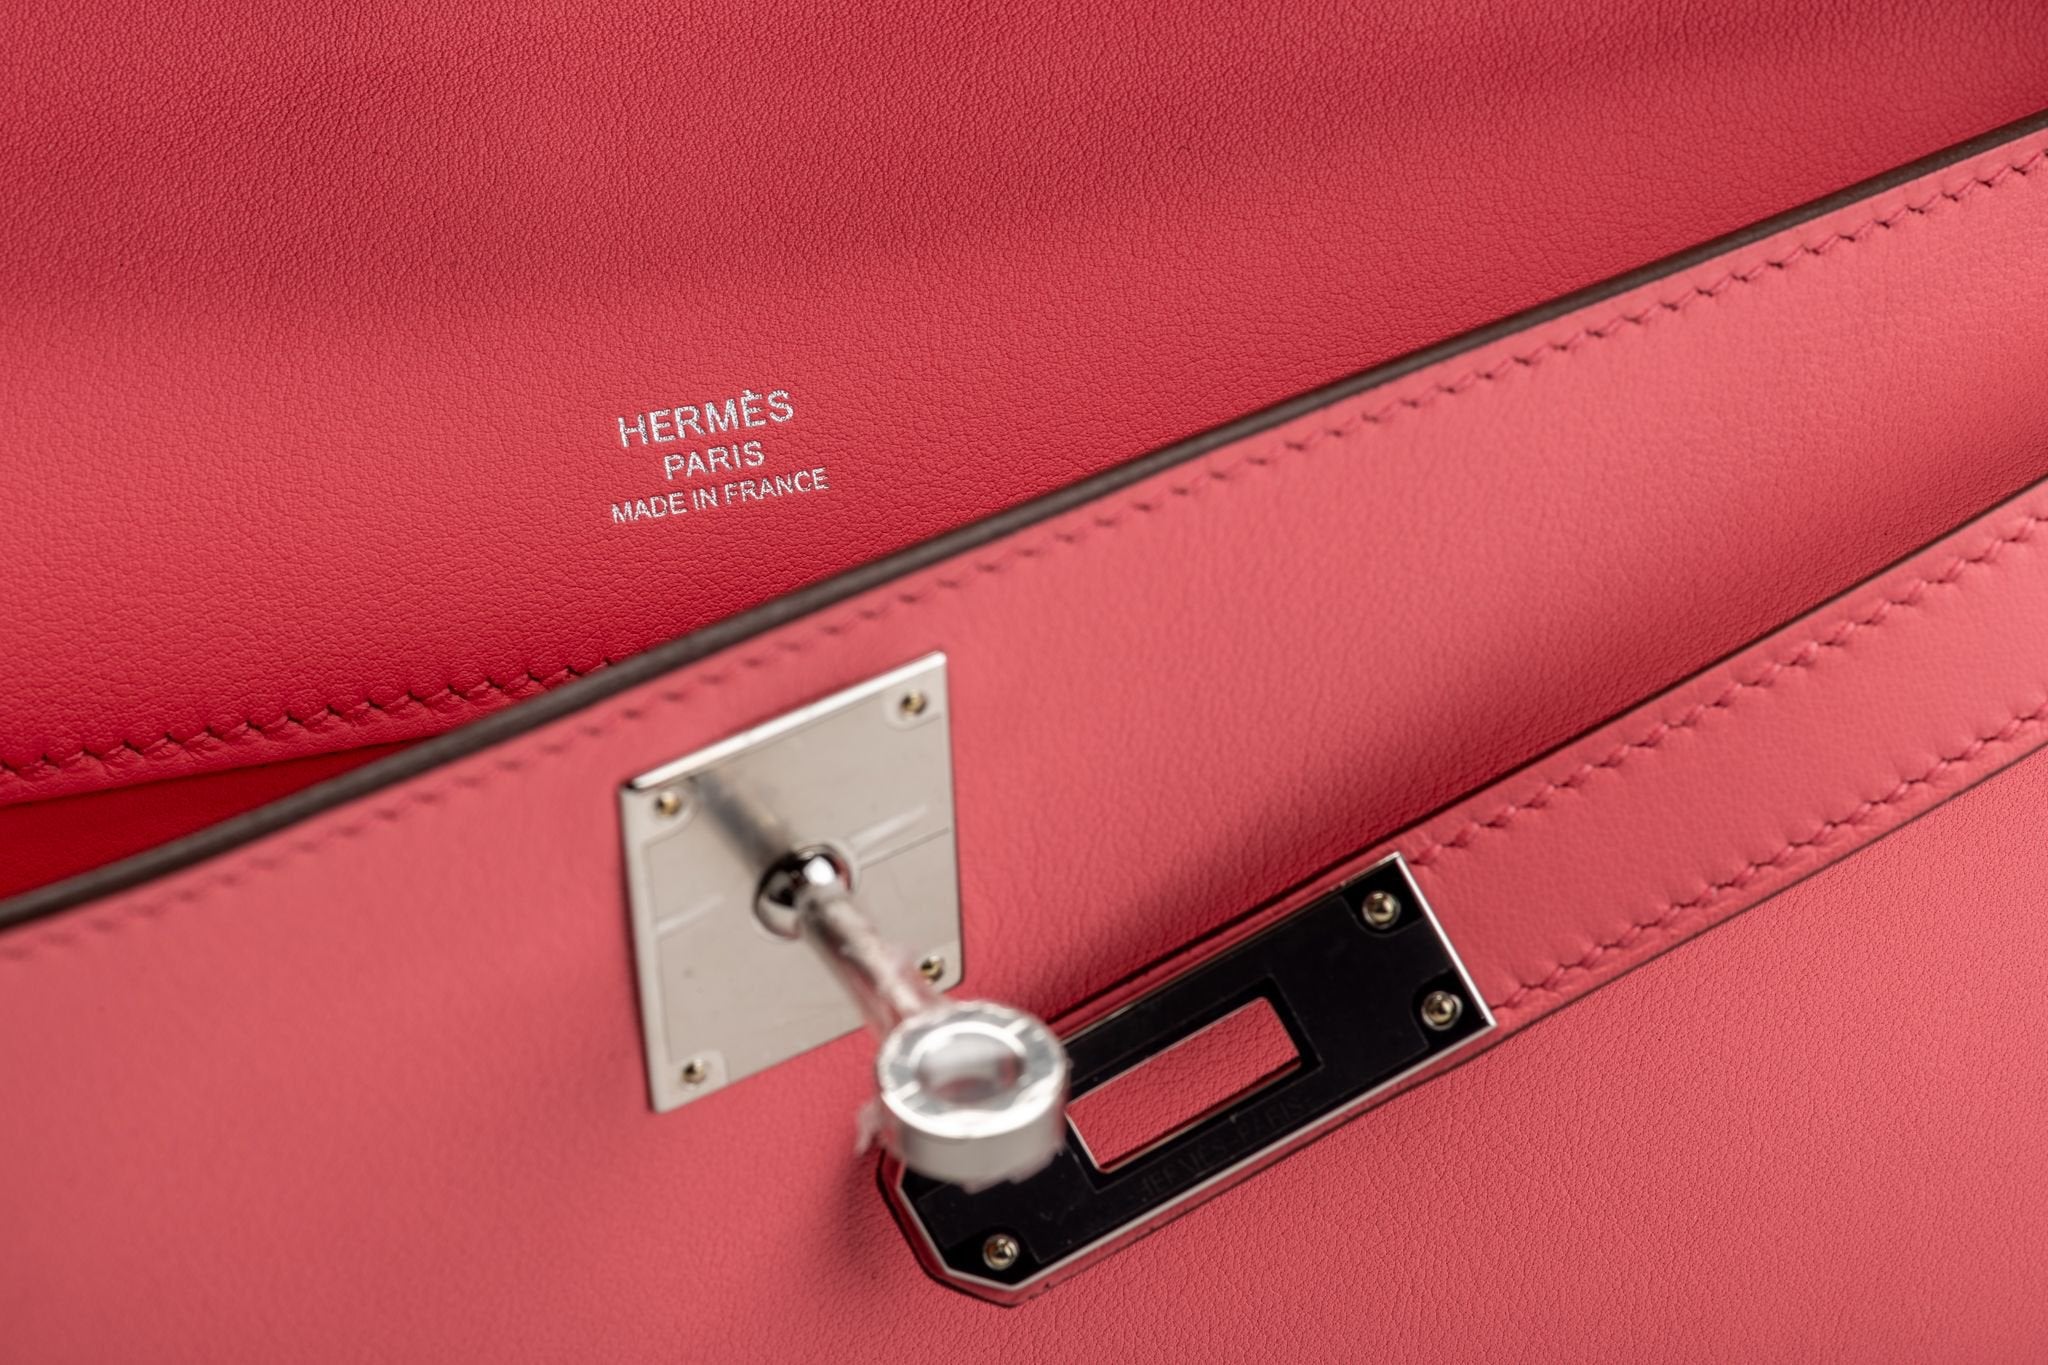 SOLD OUT** NEW HERMES Kelly Cut Clutch. Rose Azalee / PHW. 100% Authentic